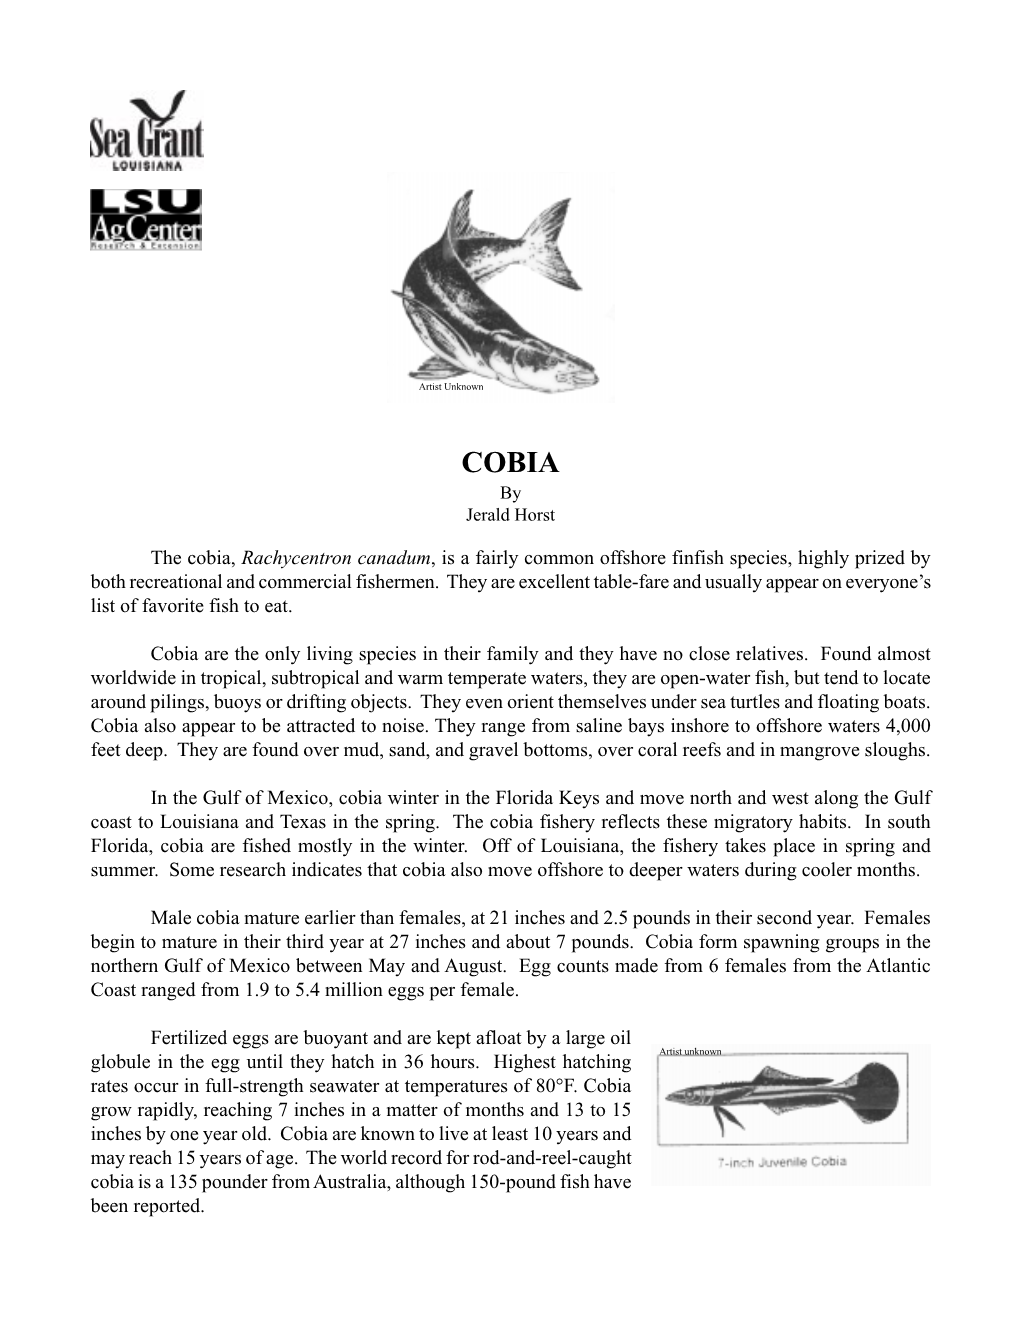 Cobia Facts 03